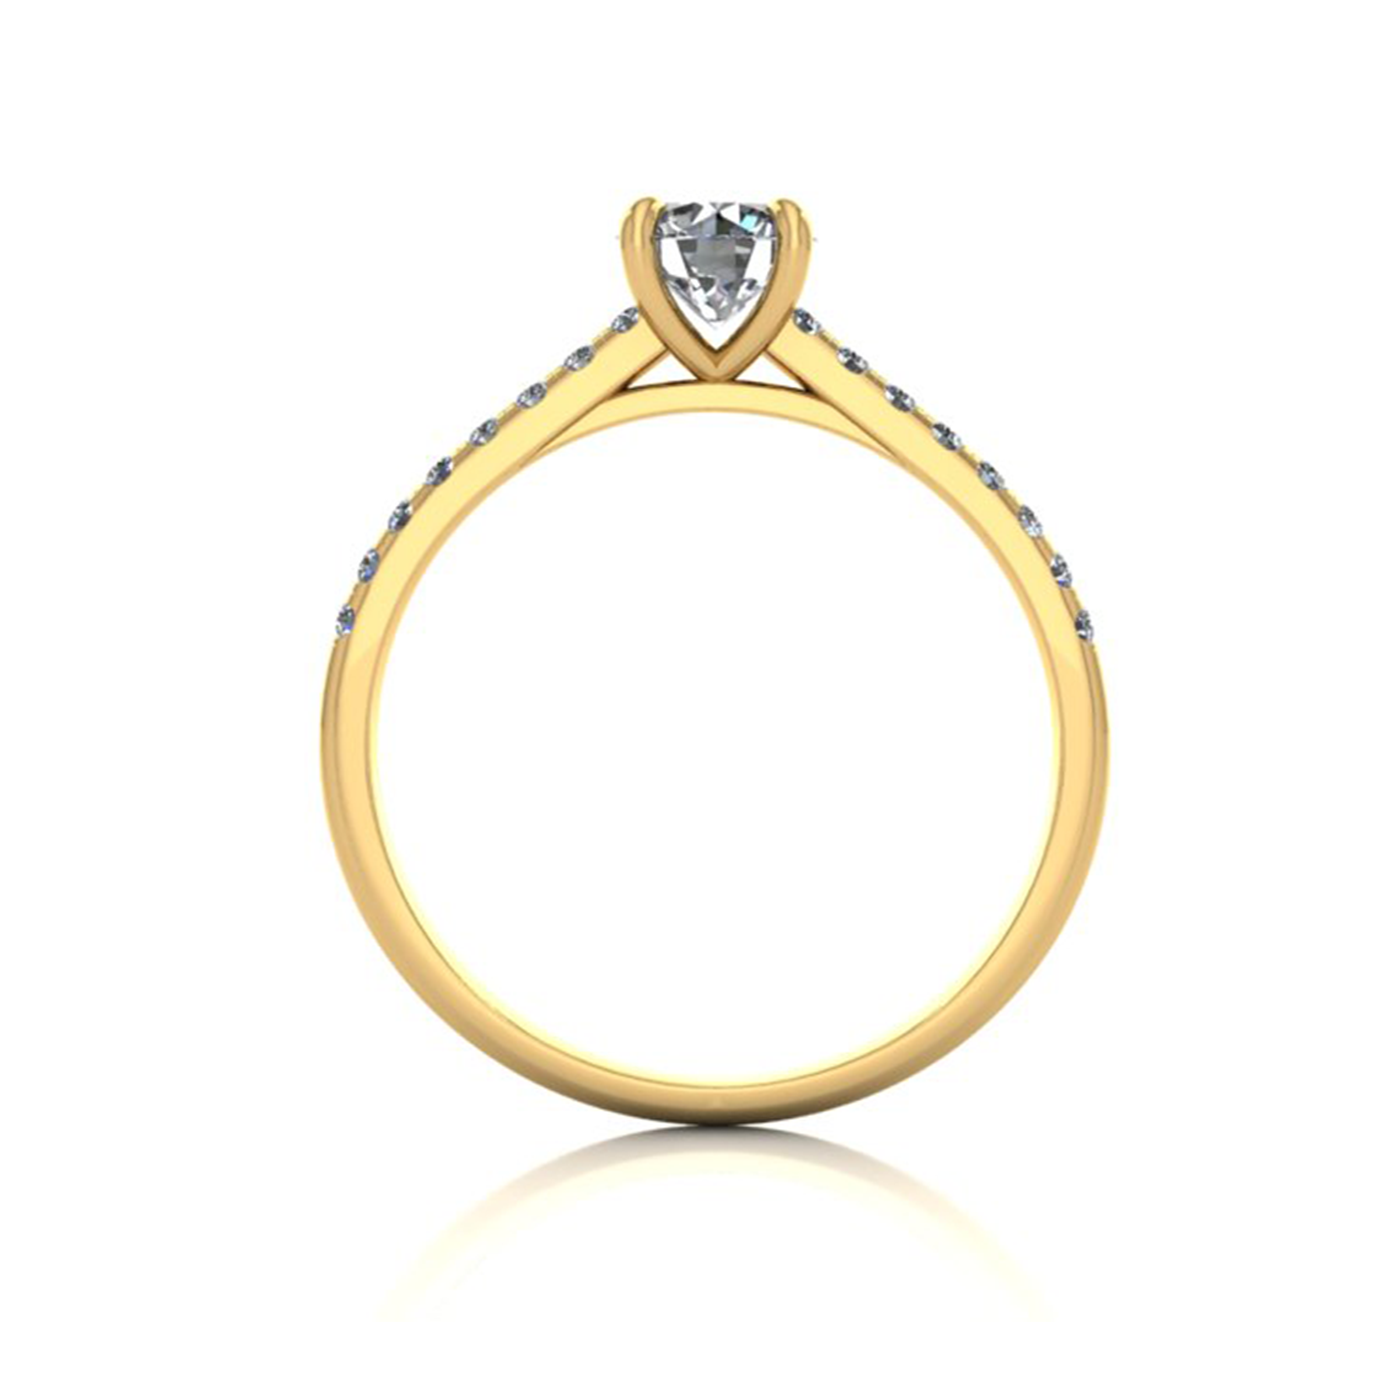 18k yellow gold 0,50 ct 4 prongs round cut diamond engagement ring with whisper thin pavÉ set band